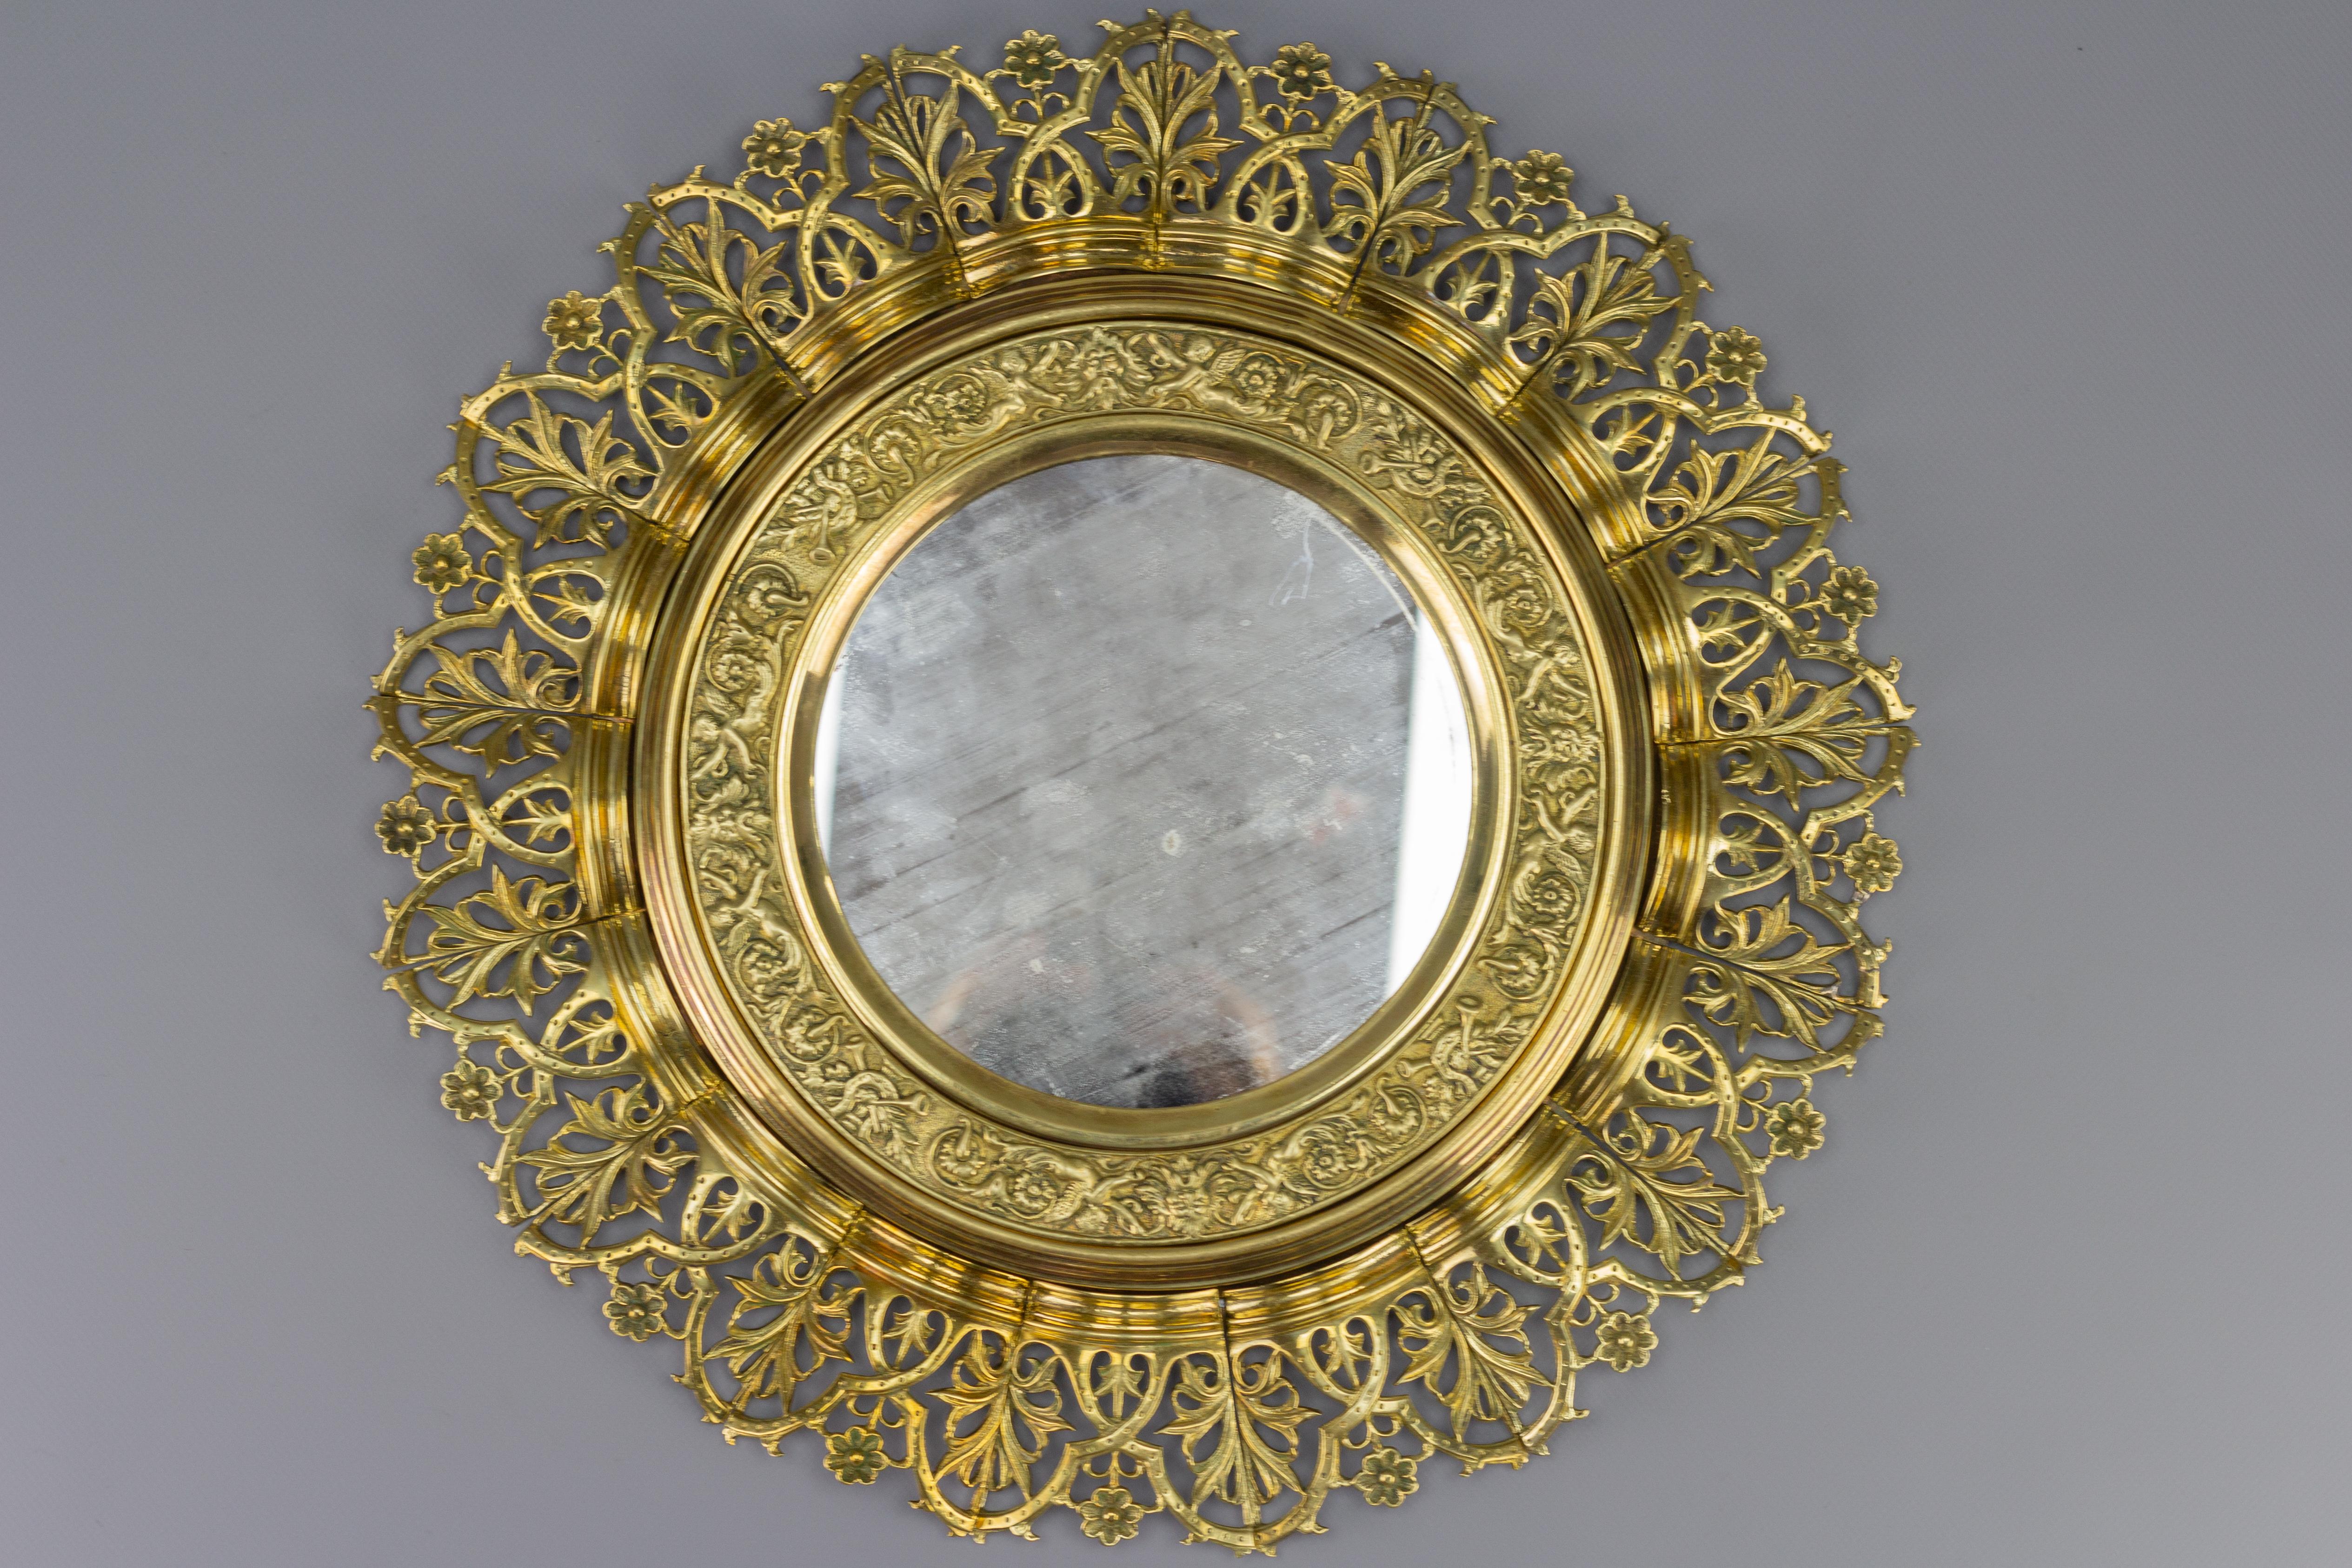 Antique Circular Bronze and Brass Mirror in Sunburst Shape, Early 20th Century For Sale 12